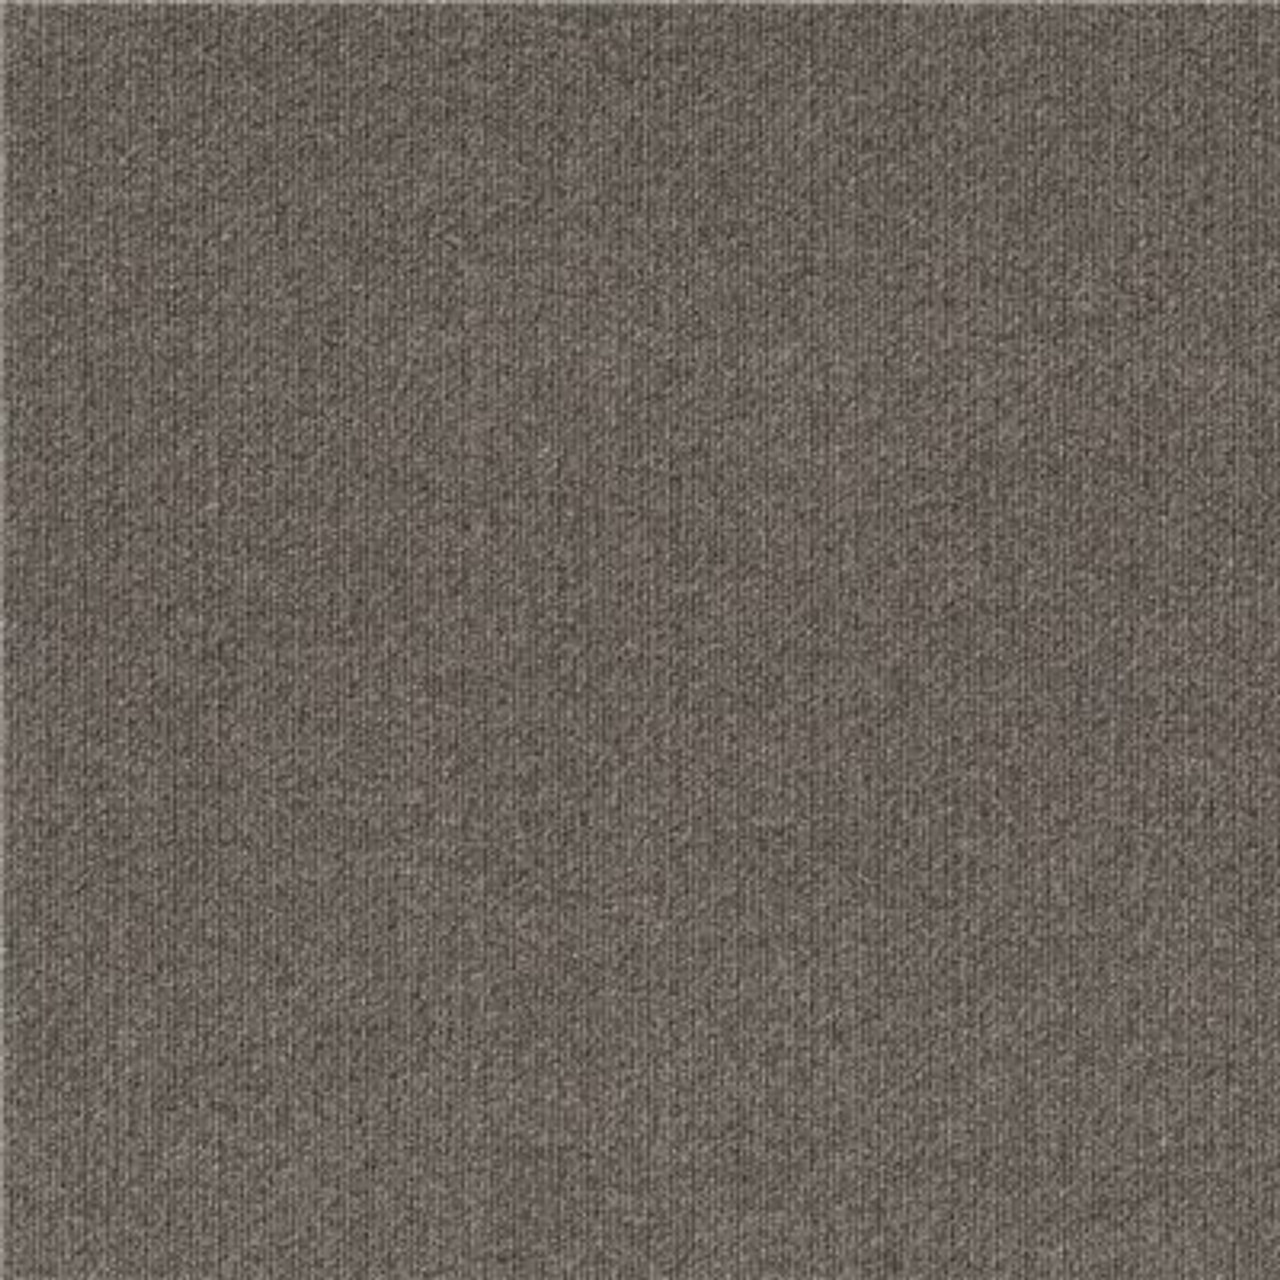 Foss First Impressions Sky Grey Ribbed Texture 24 In. X 24 In. Commercial Peel And Stick Carpet Tile (15-Tile / Case)